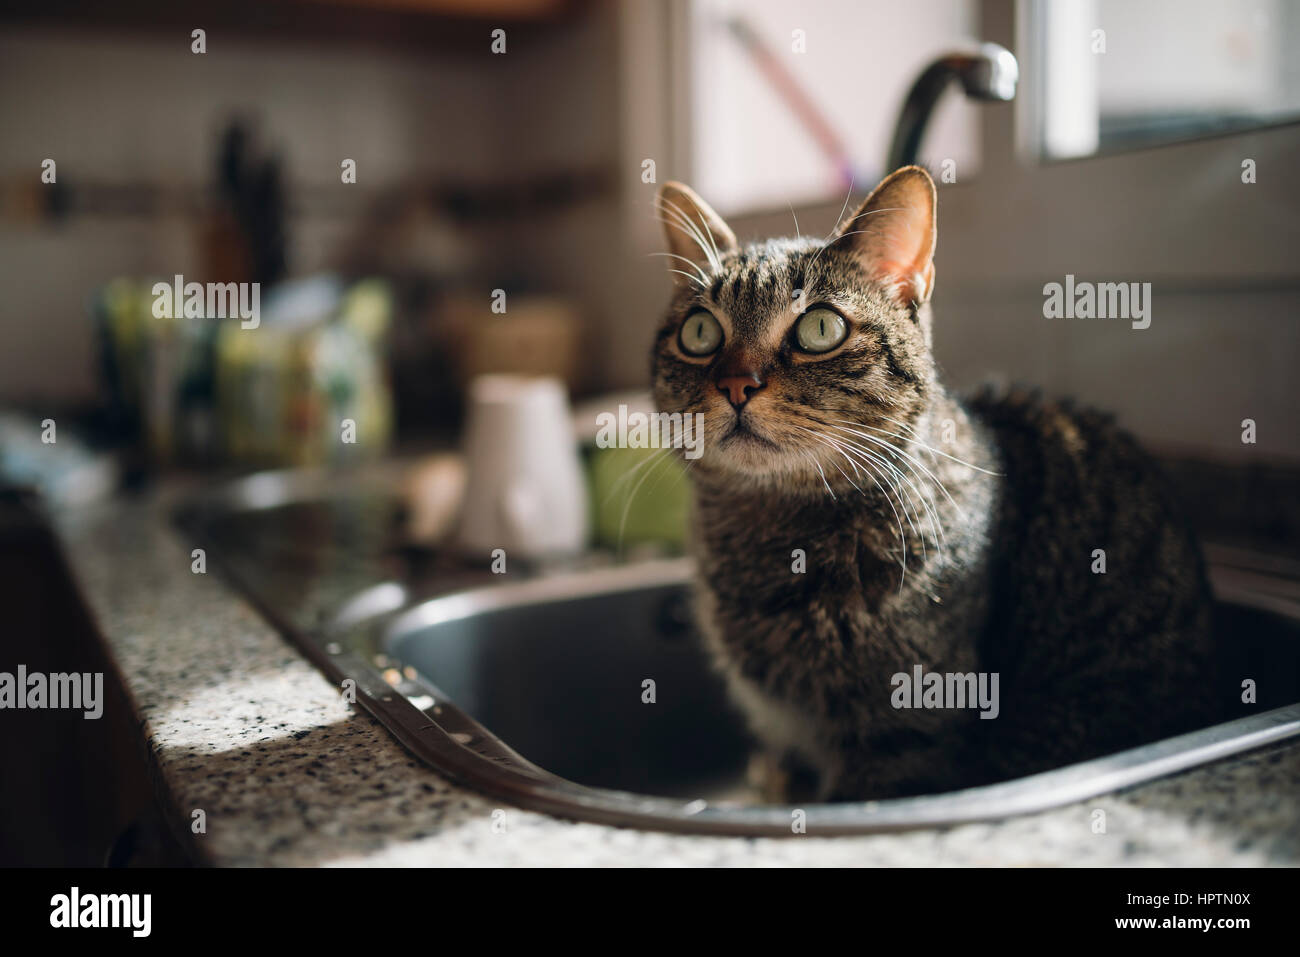 Portrait of tabby cat sitting in the kitchen sink Stock Photo